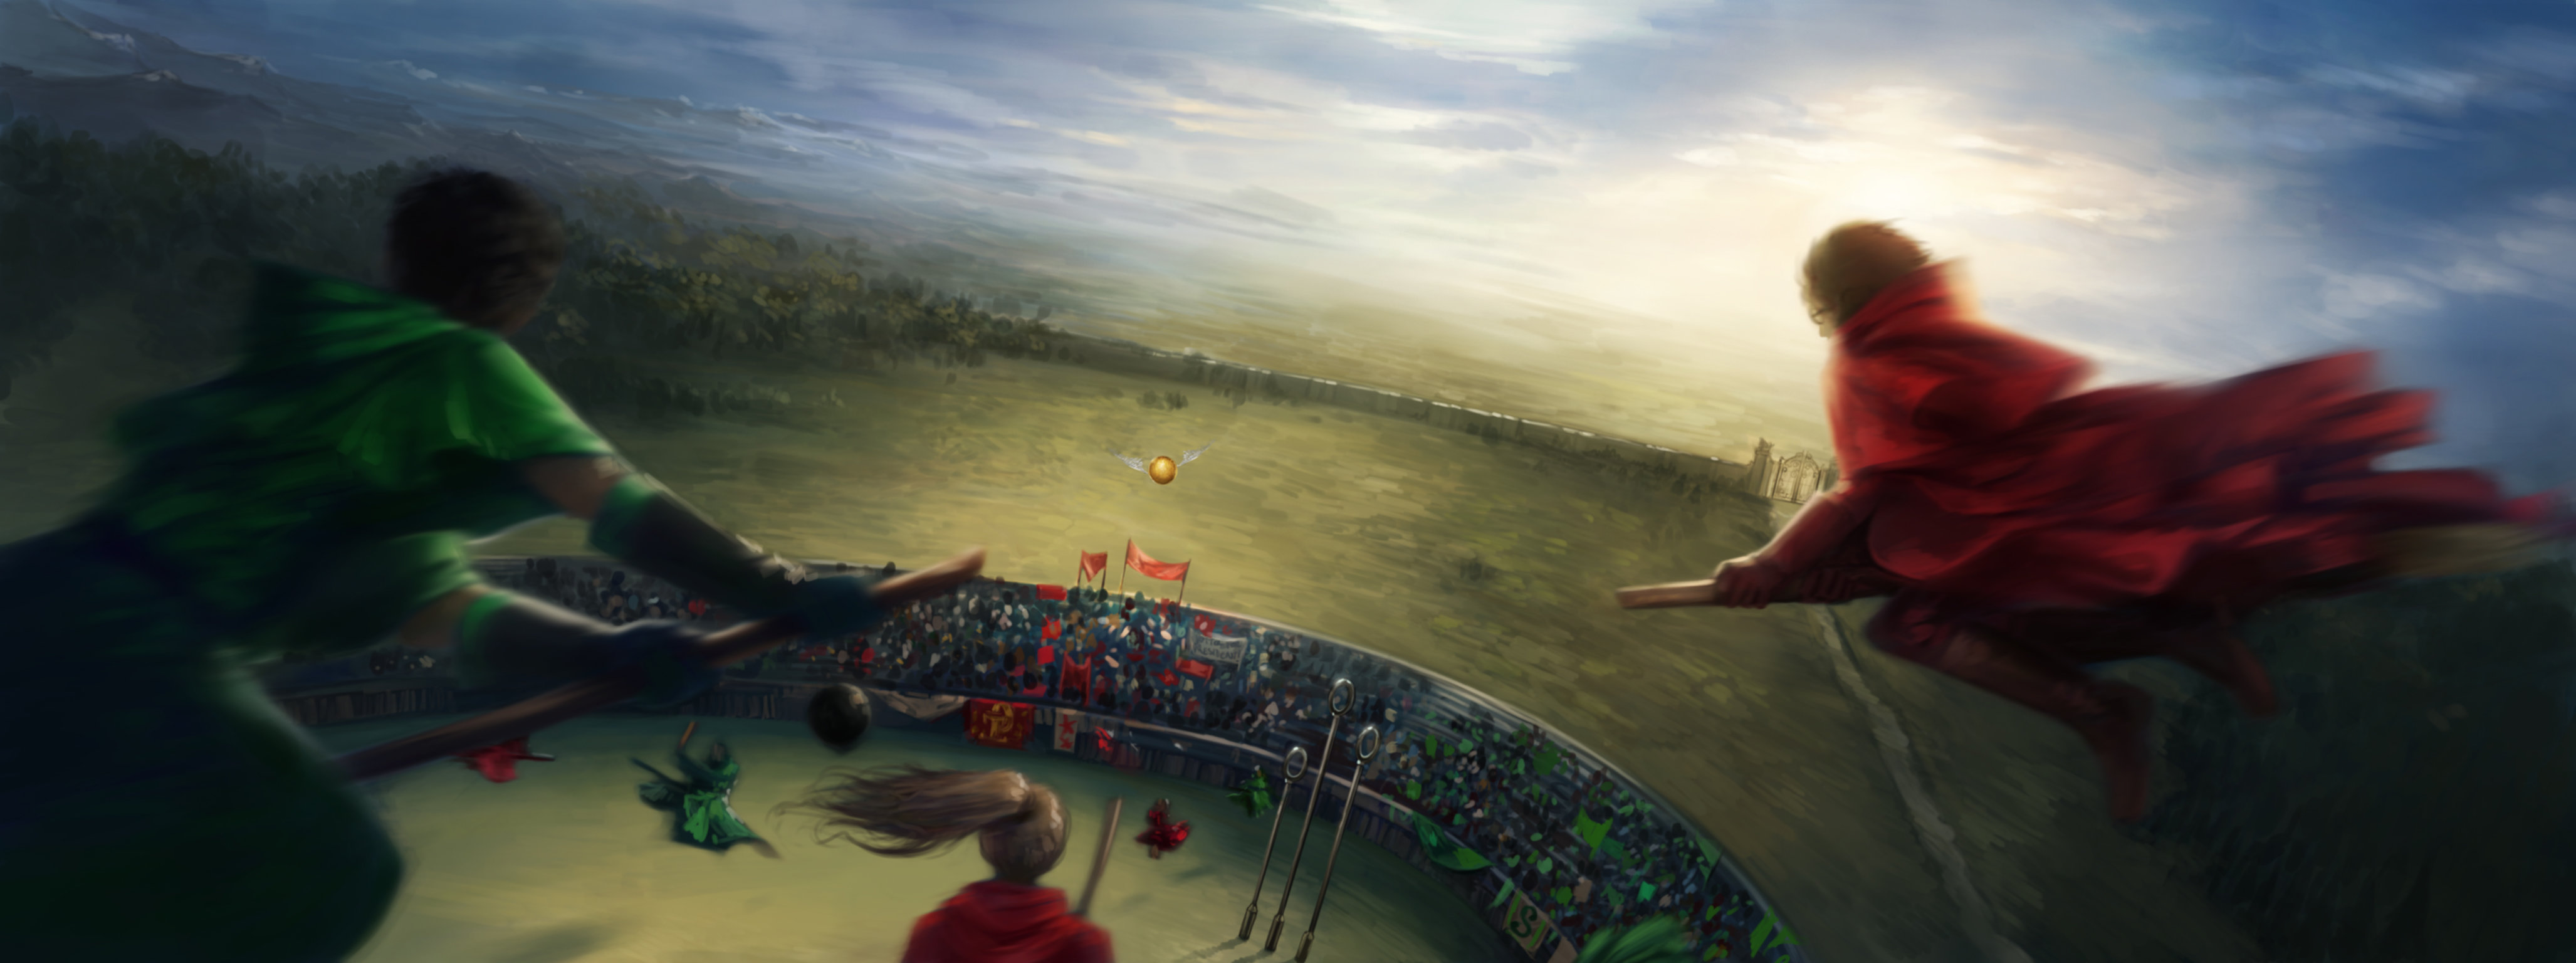 6 reasons why Quidditch is bad for Harry’s health Wizarding World